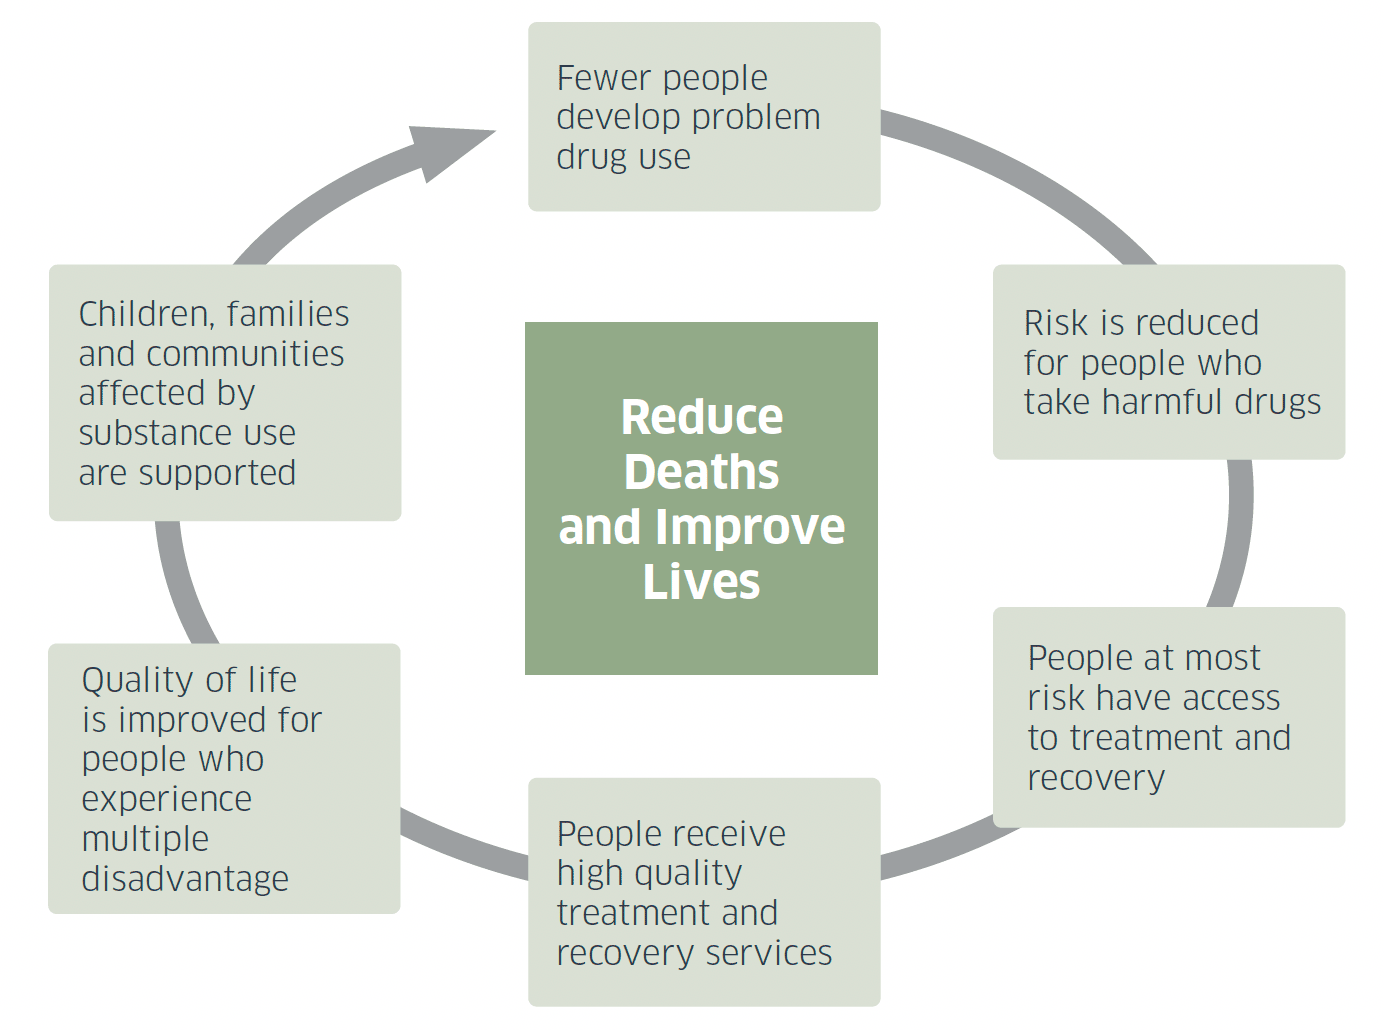 The 6 outcomes and central aim of the National Mission to reduce deaths and improves lives.